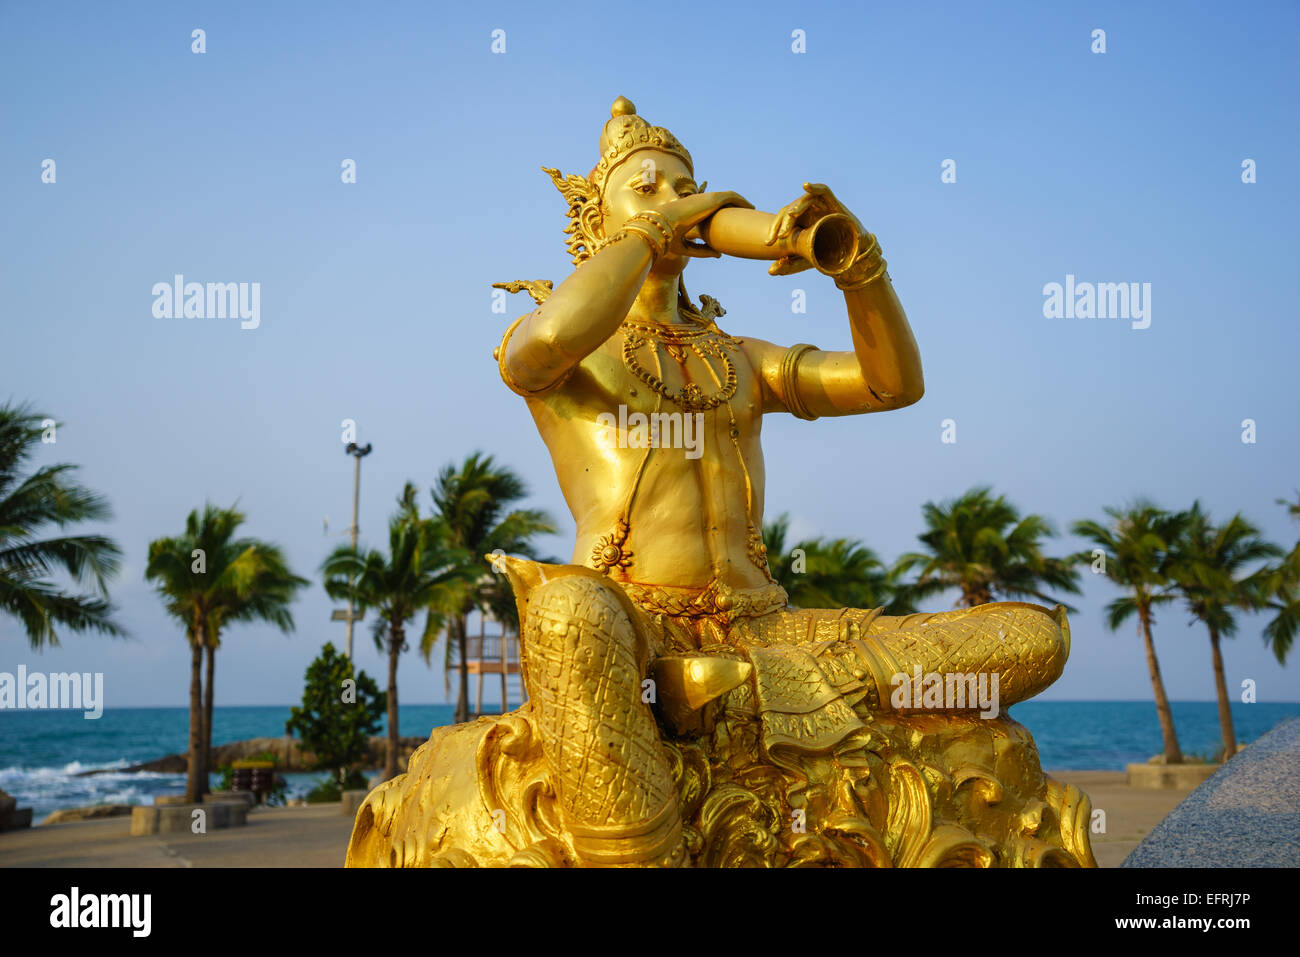 Golden statue of Phra Aphai Mani King blowing his pipe by the sea. Stock Photo